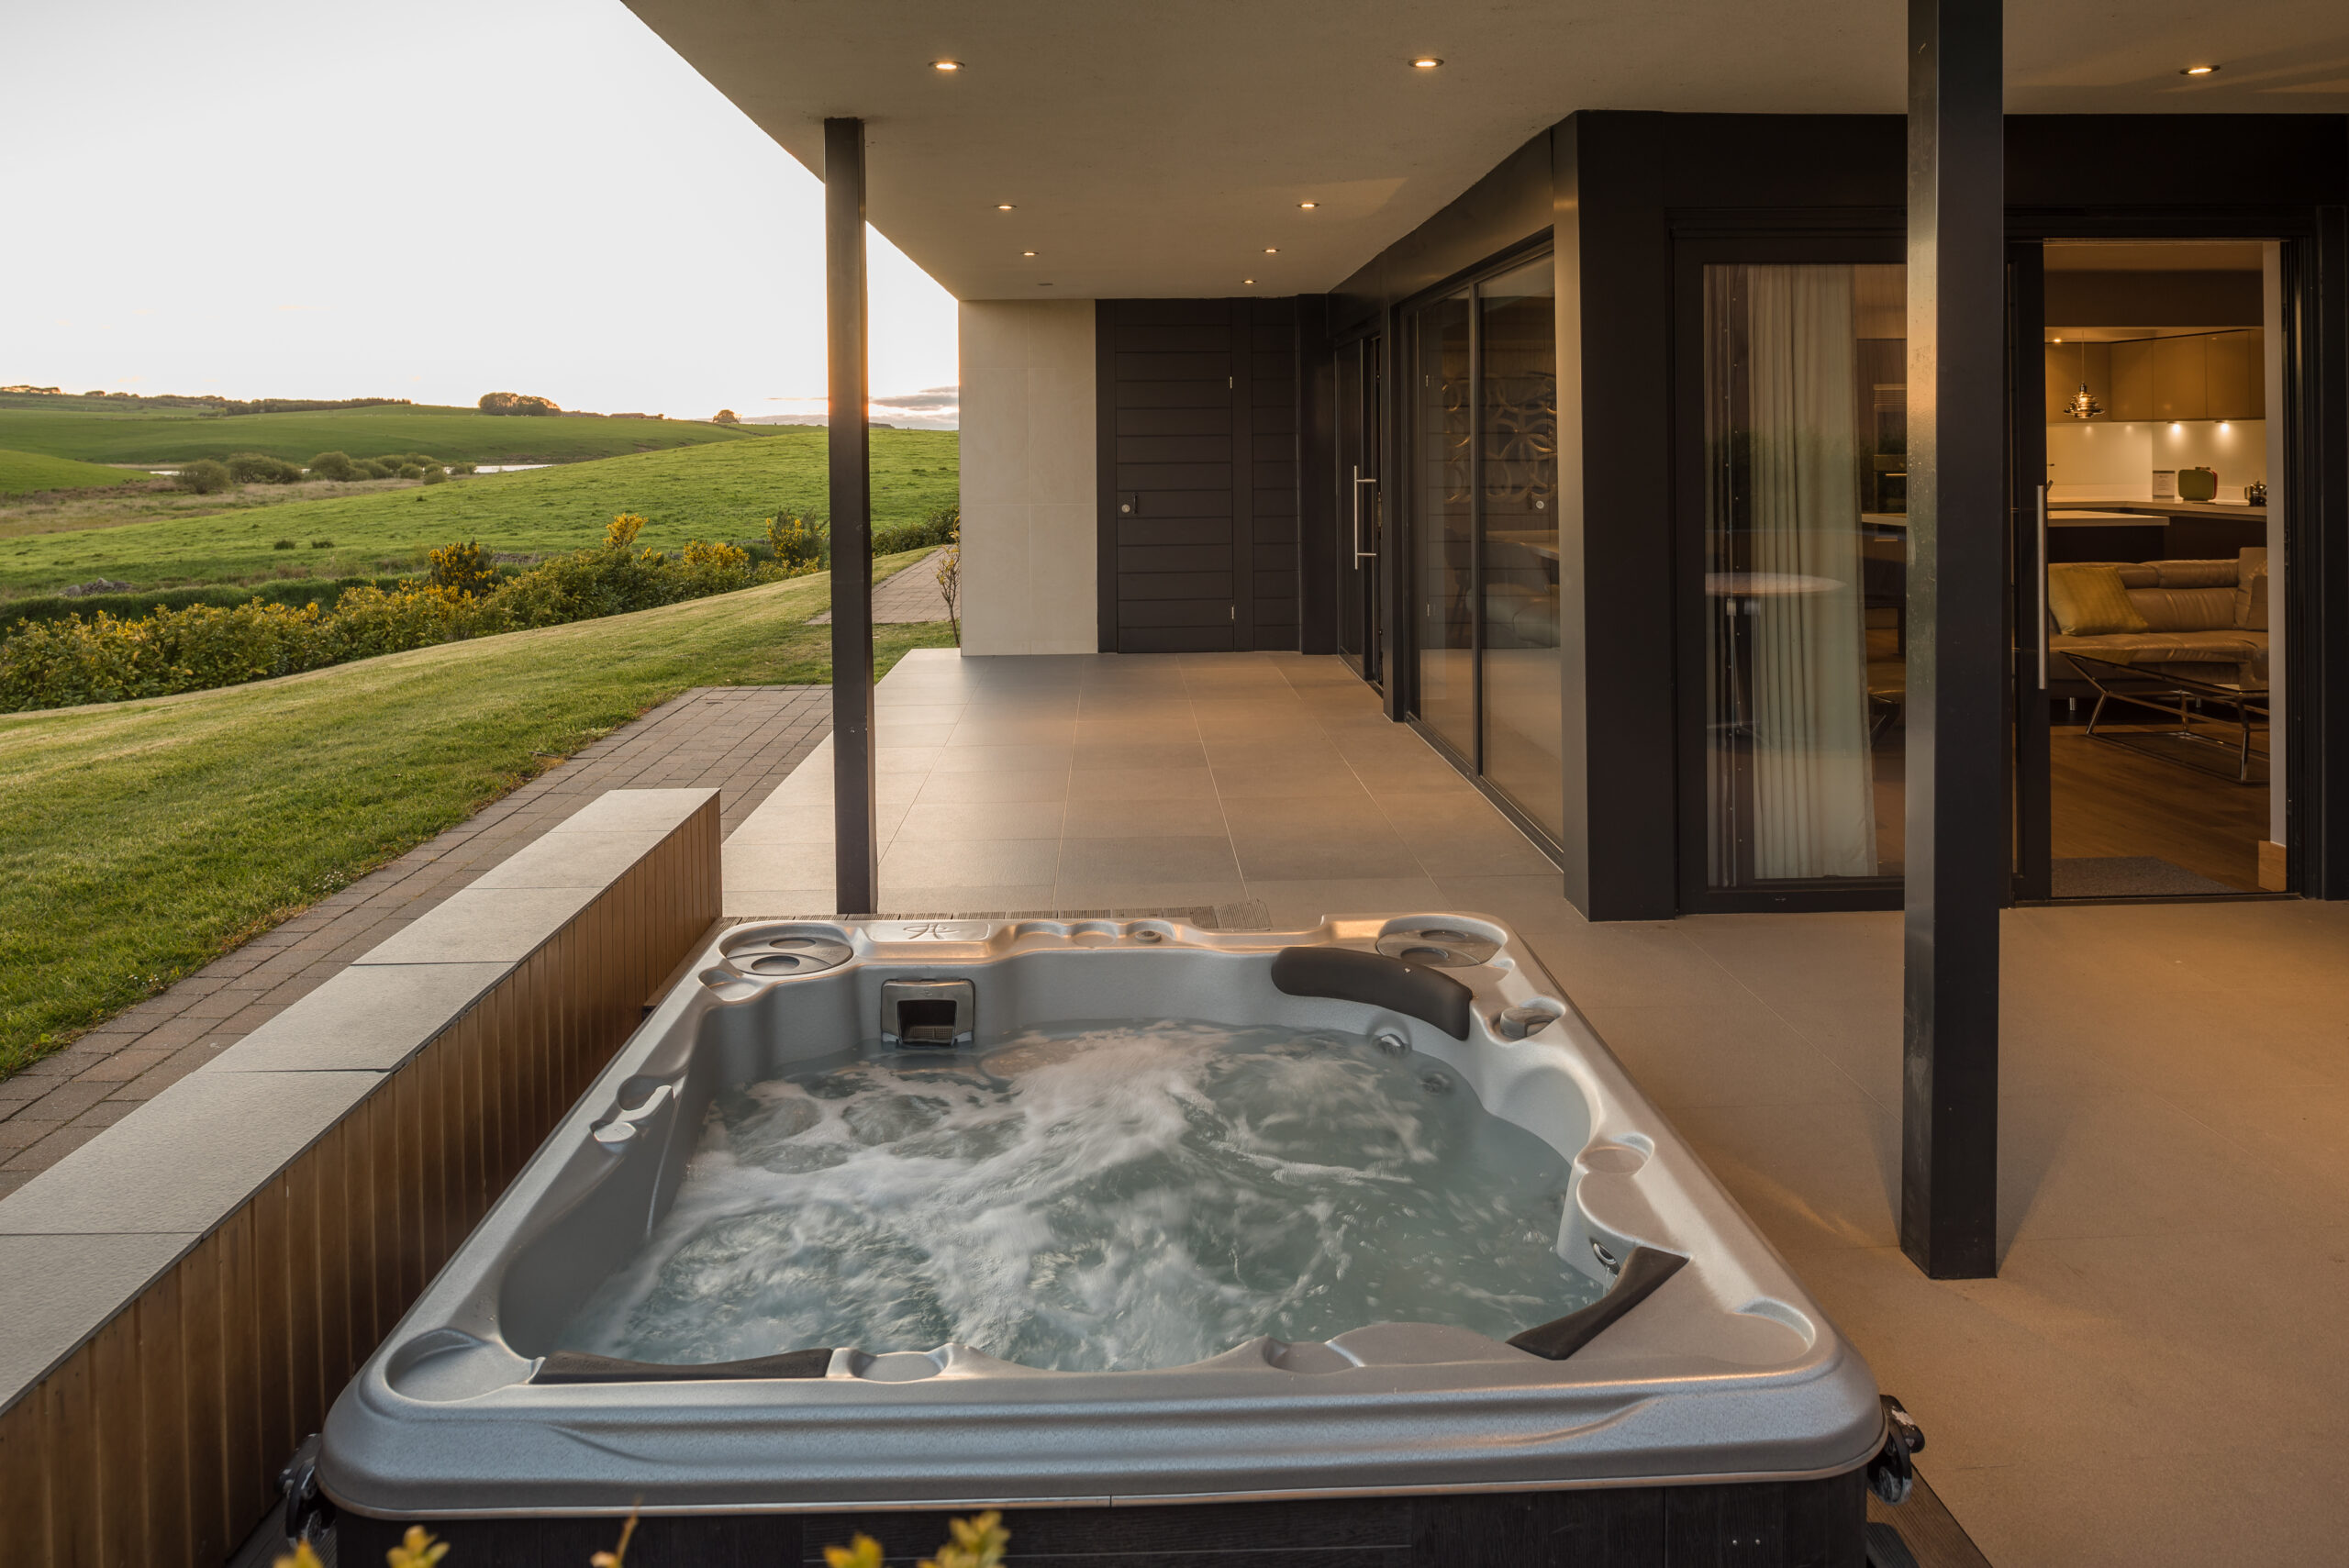 Lochside hot tub after Quoin lighting and post-production